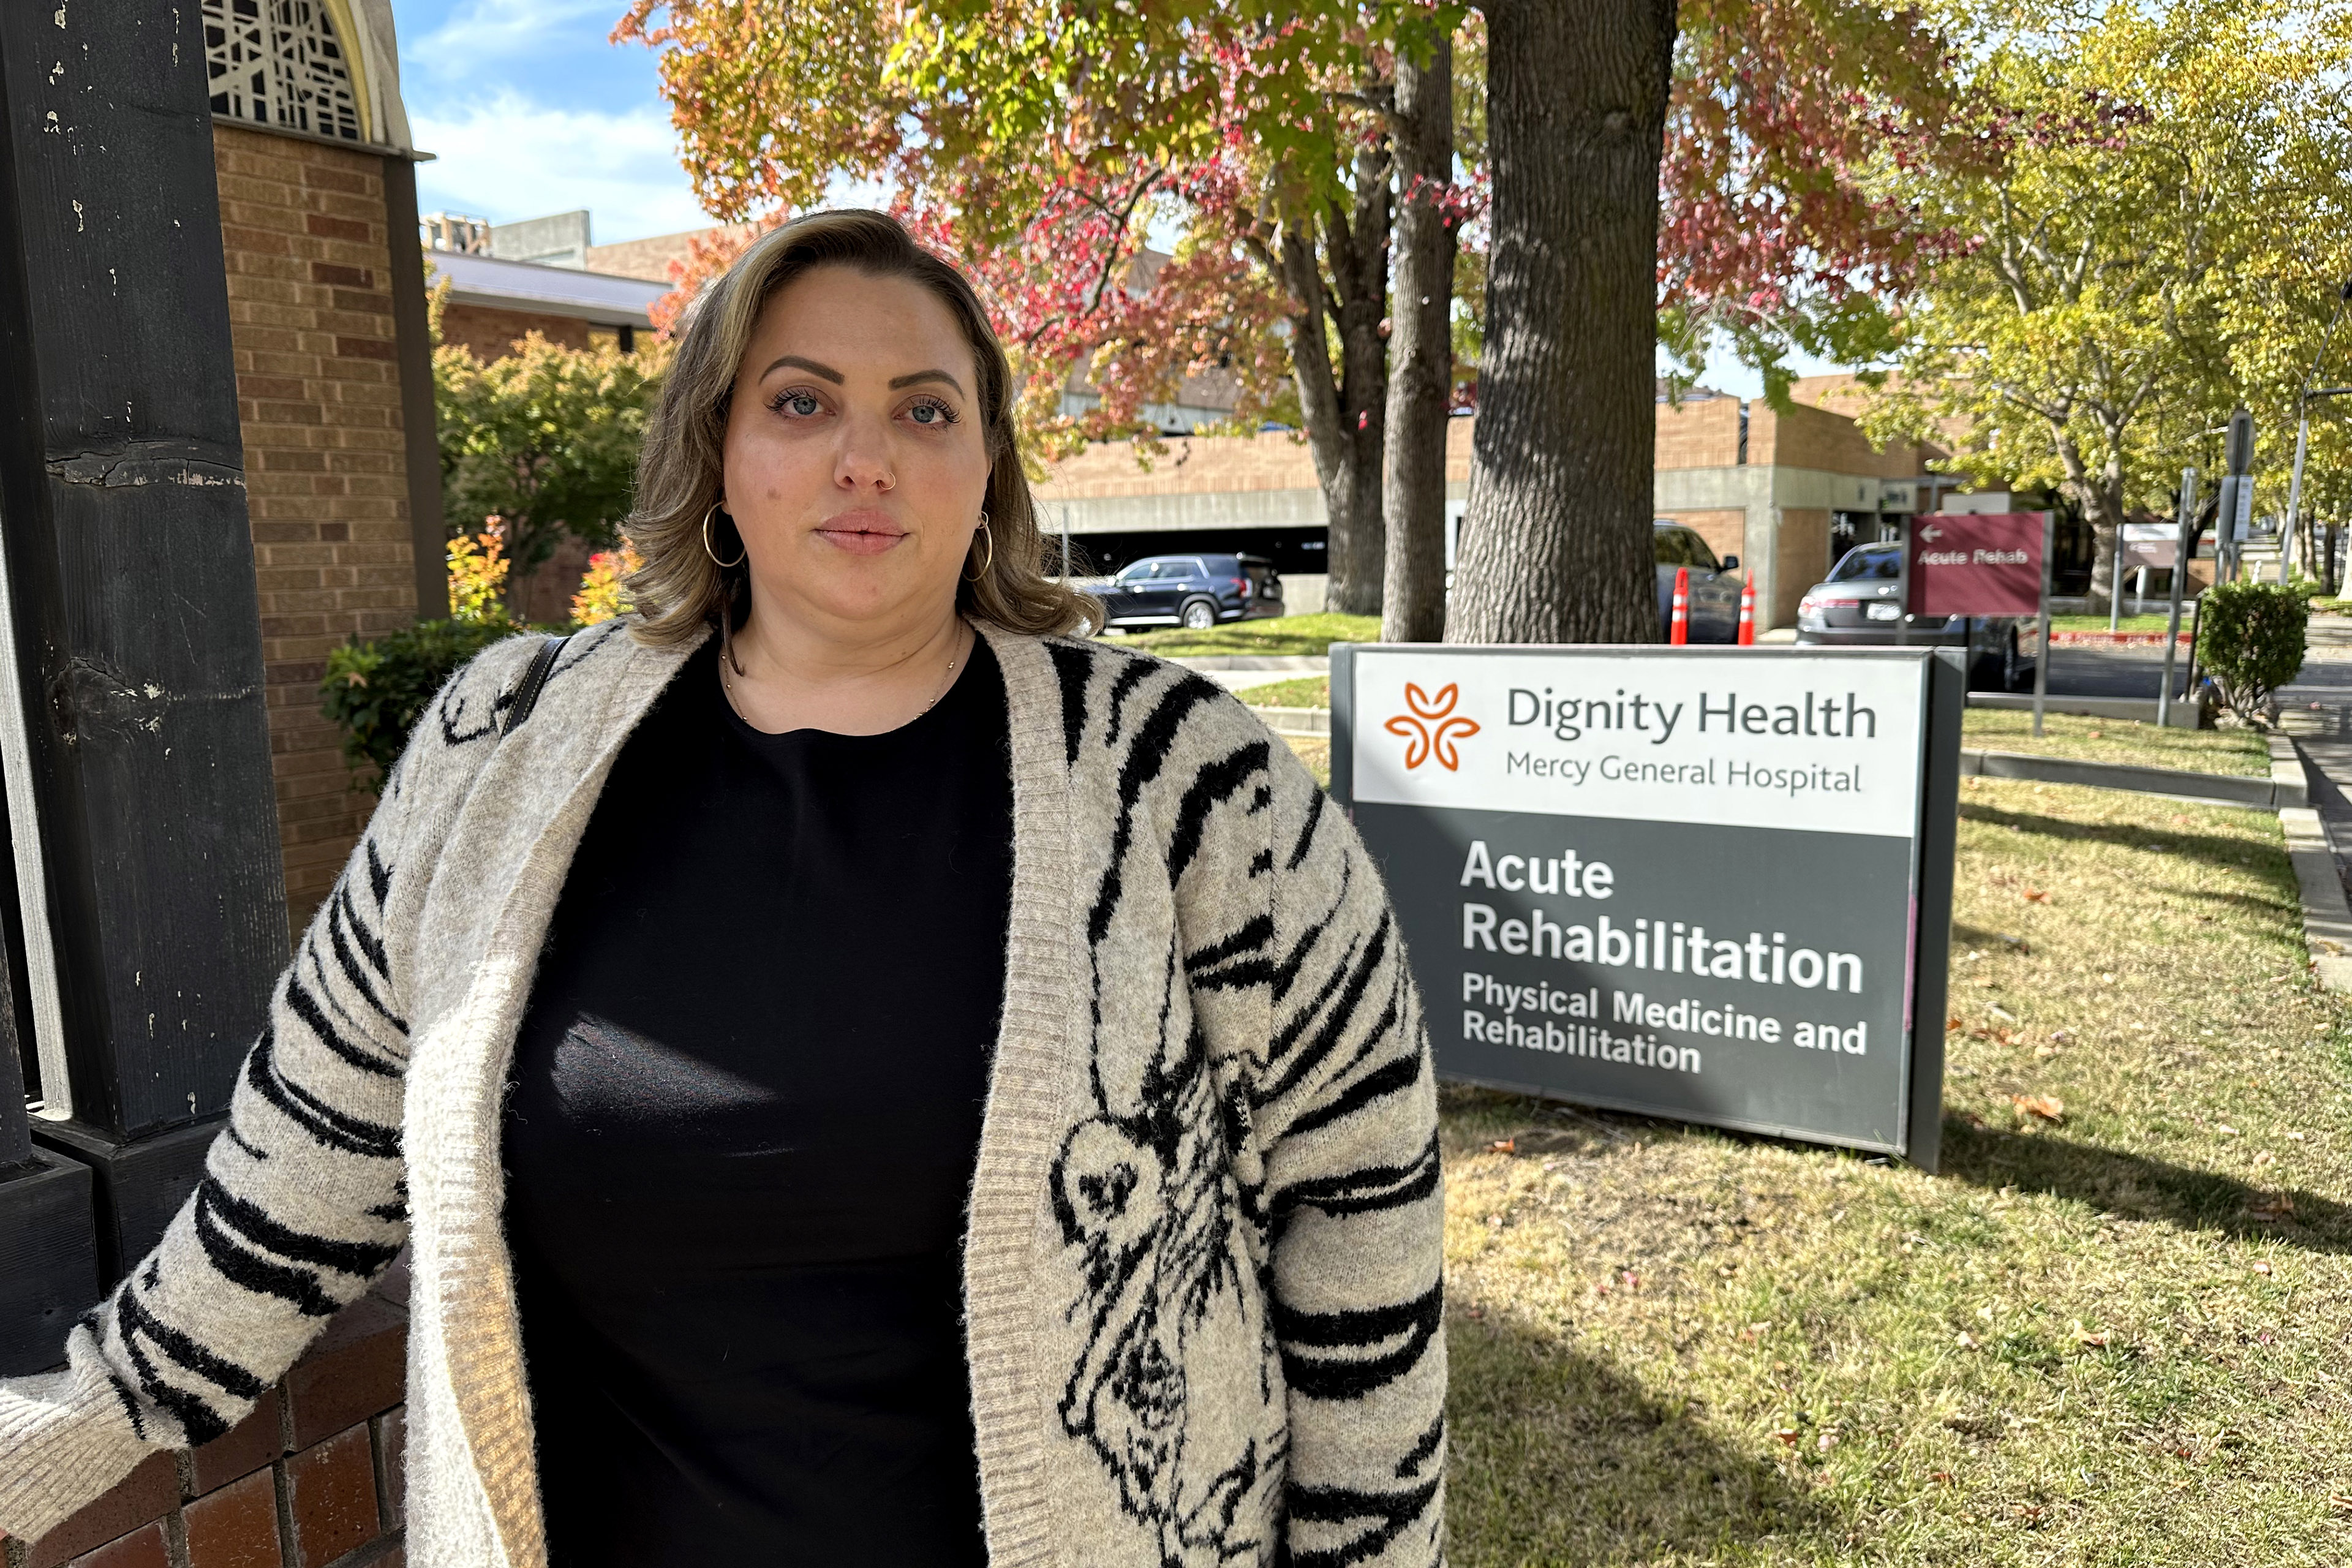 Terra Khan stands outside Mercy General Hospital on a sunny day. Behind her, a sign is visible. It reads, "Dignity Health / Mercy General Hospital / Acute Rehabilitation / Physical Medicine and Rehabilitation."